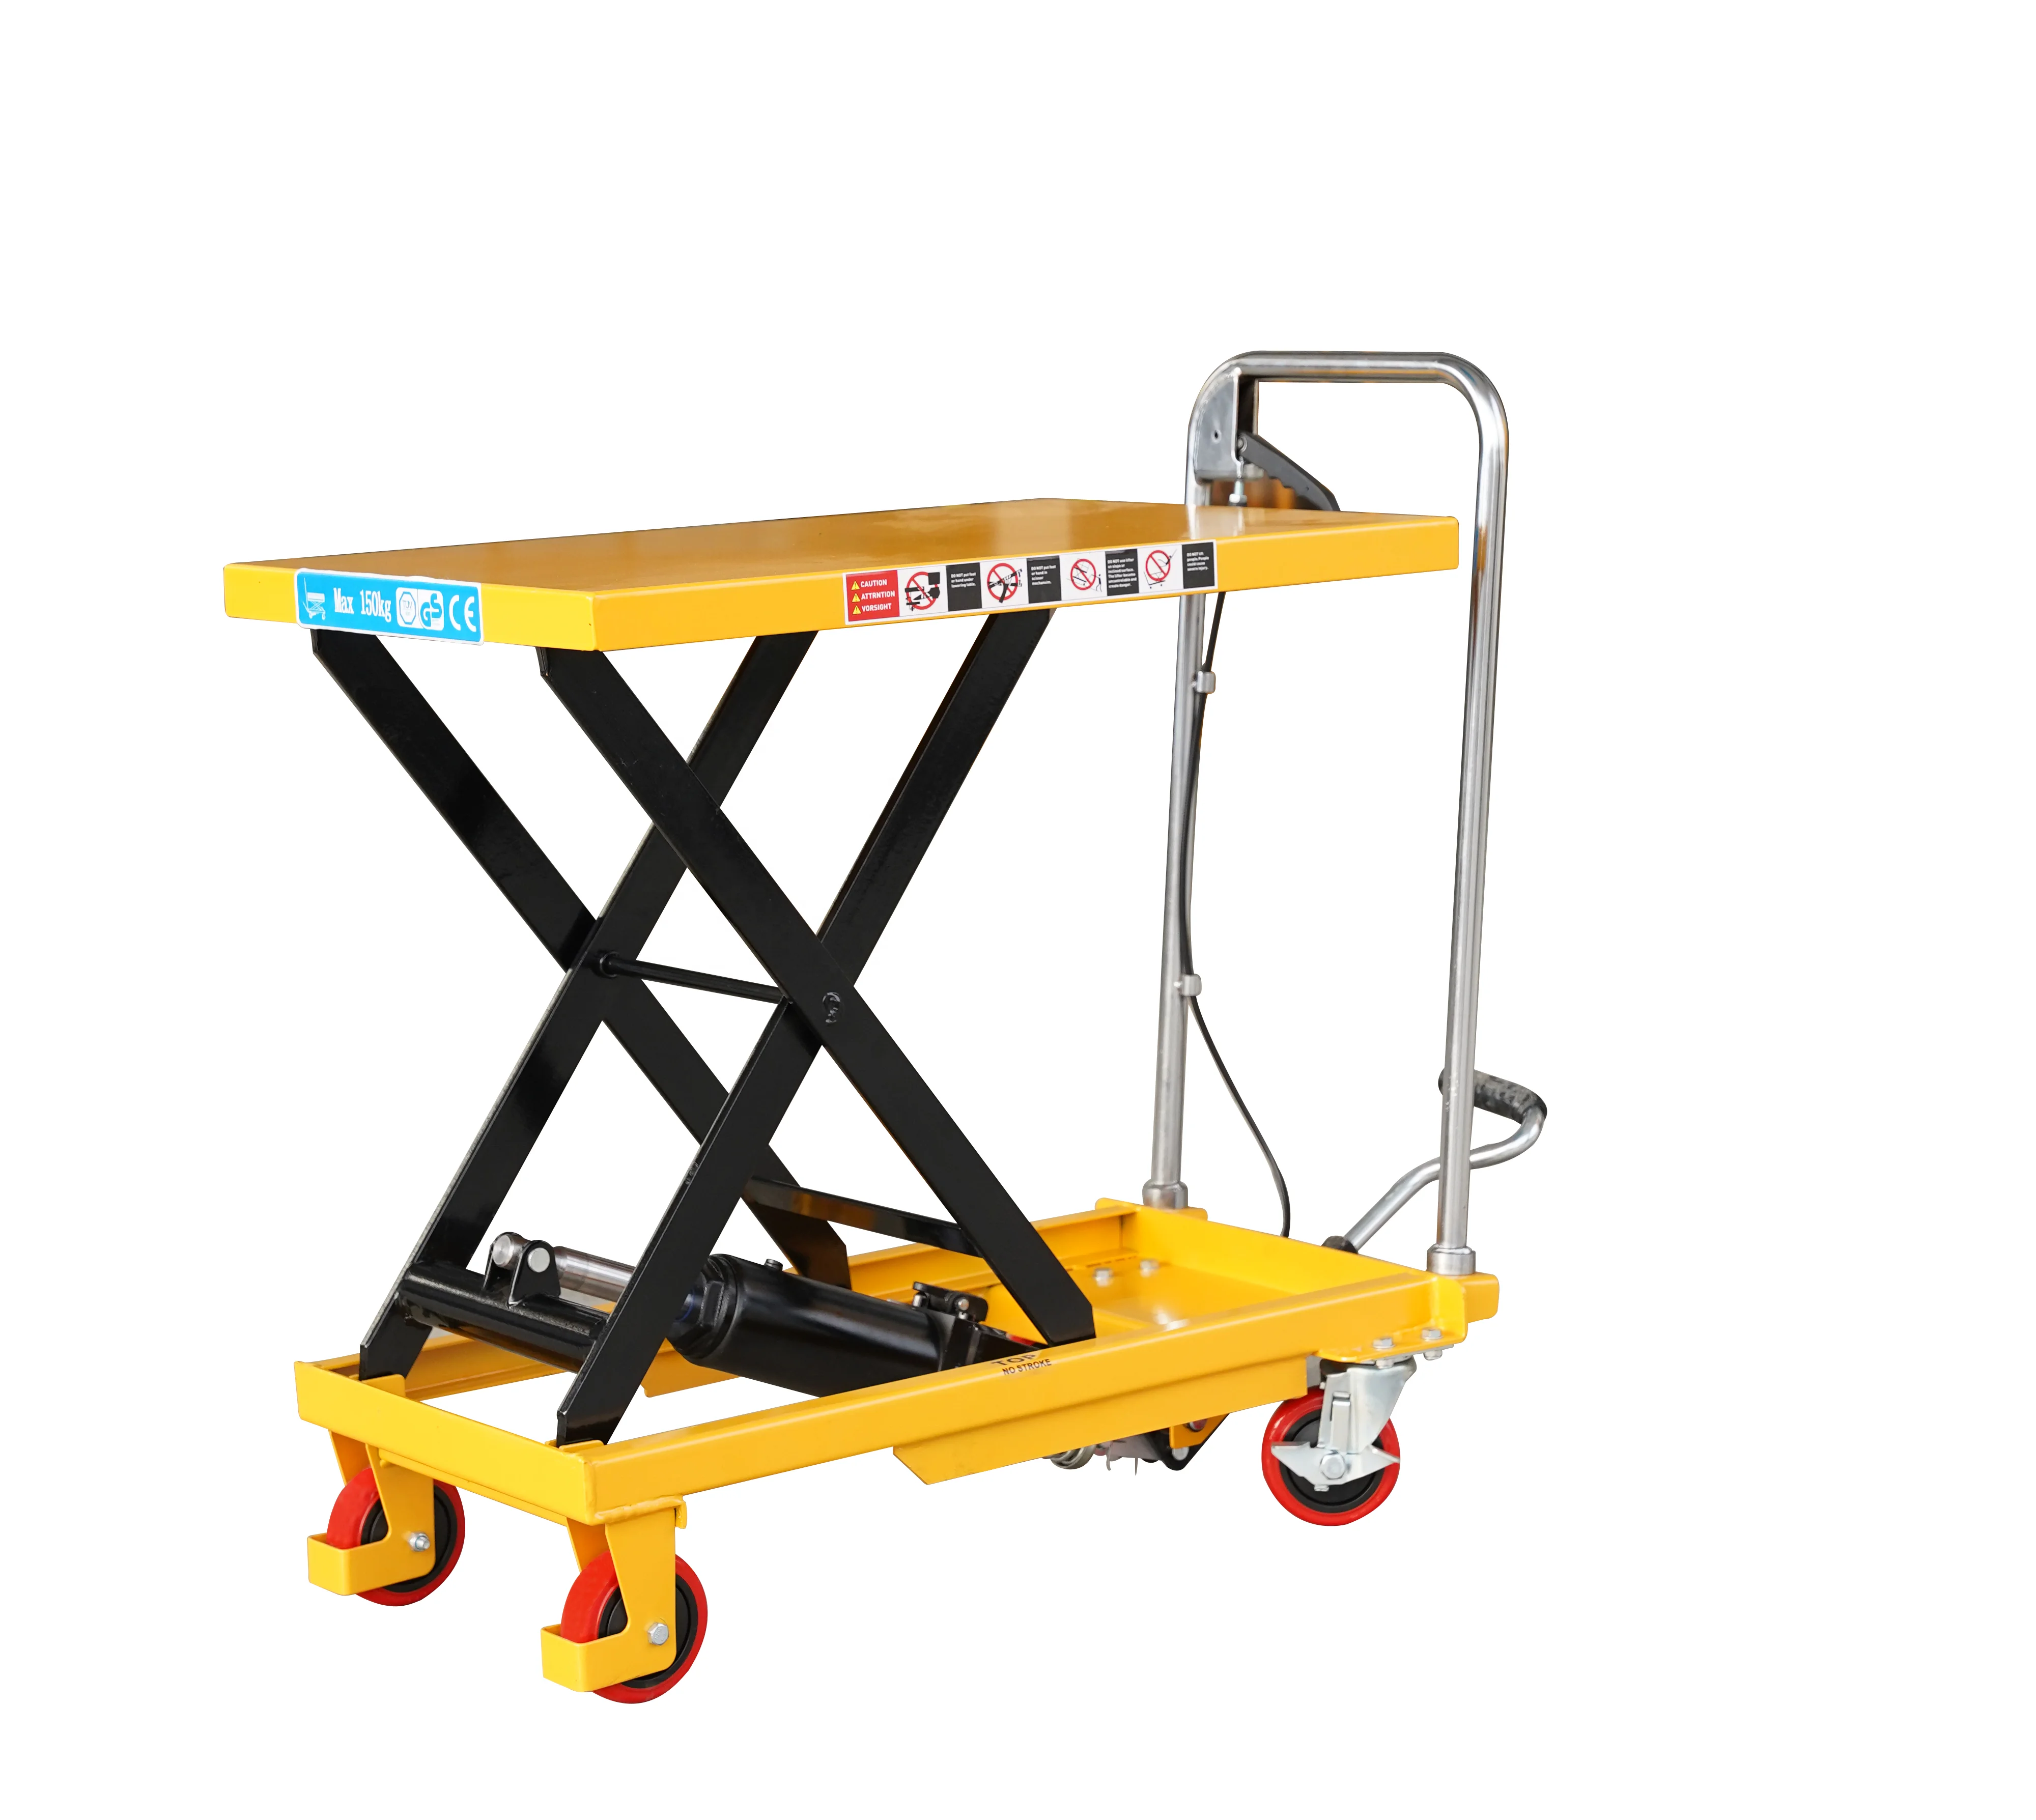 

Wholesale 150kg Auto Repair Mold Replace Use Truck Load Unload Hydraulic Manual Small Lift Table Scissor